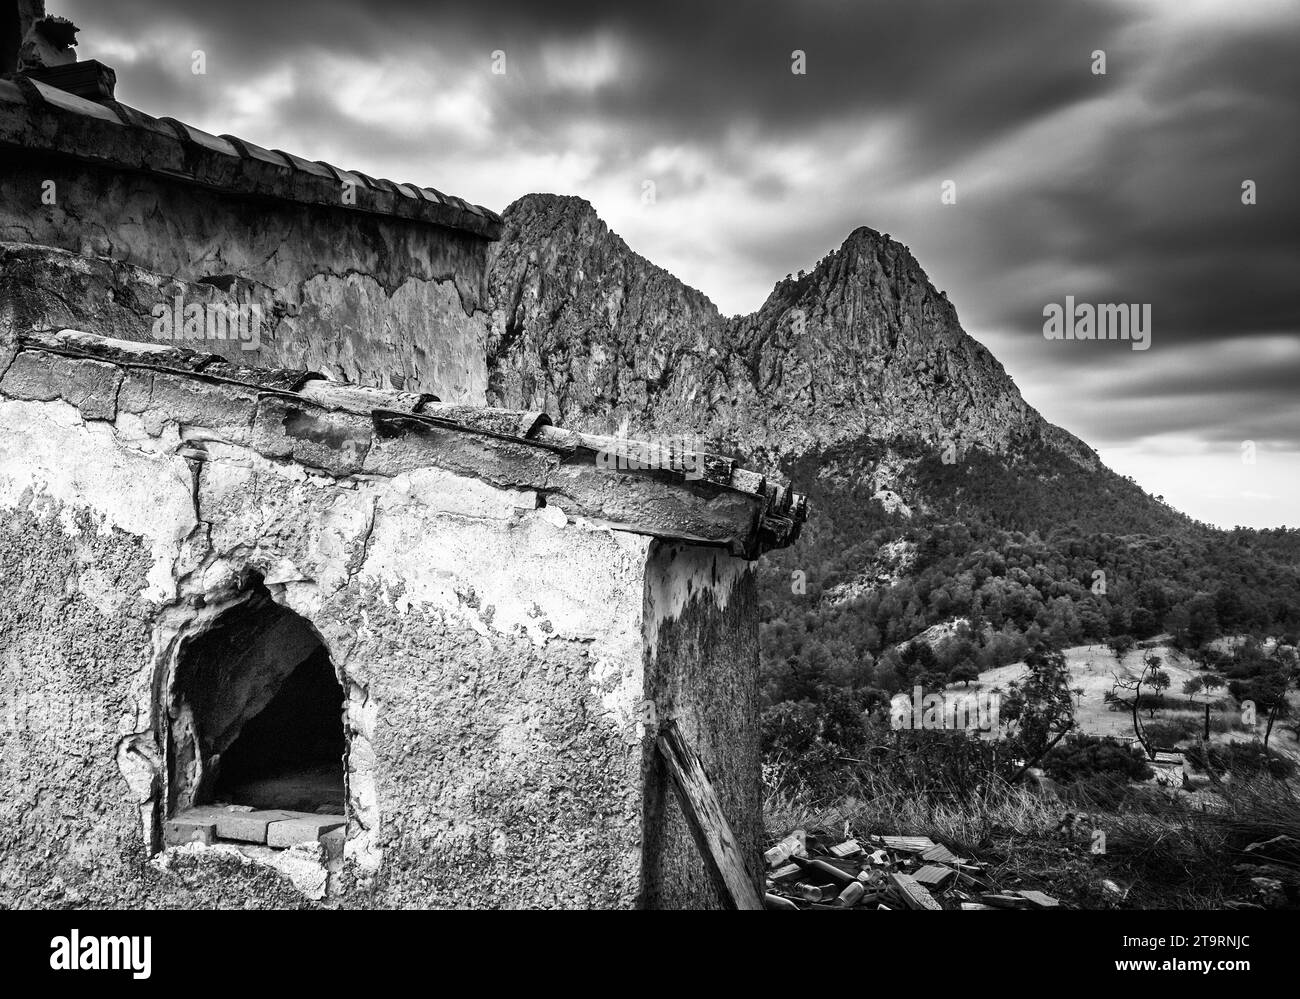 Oven from an abandoned house in Sella Stock Photo